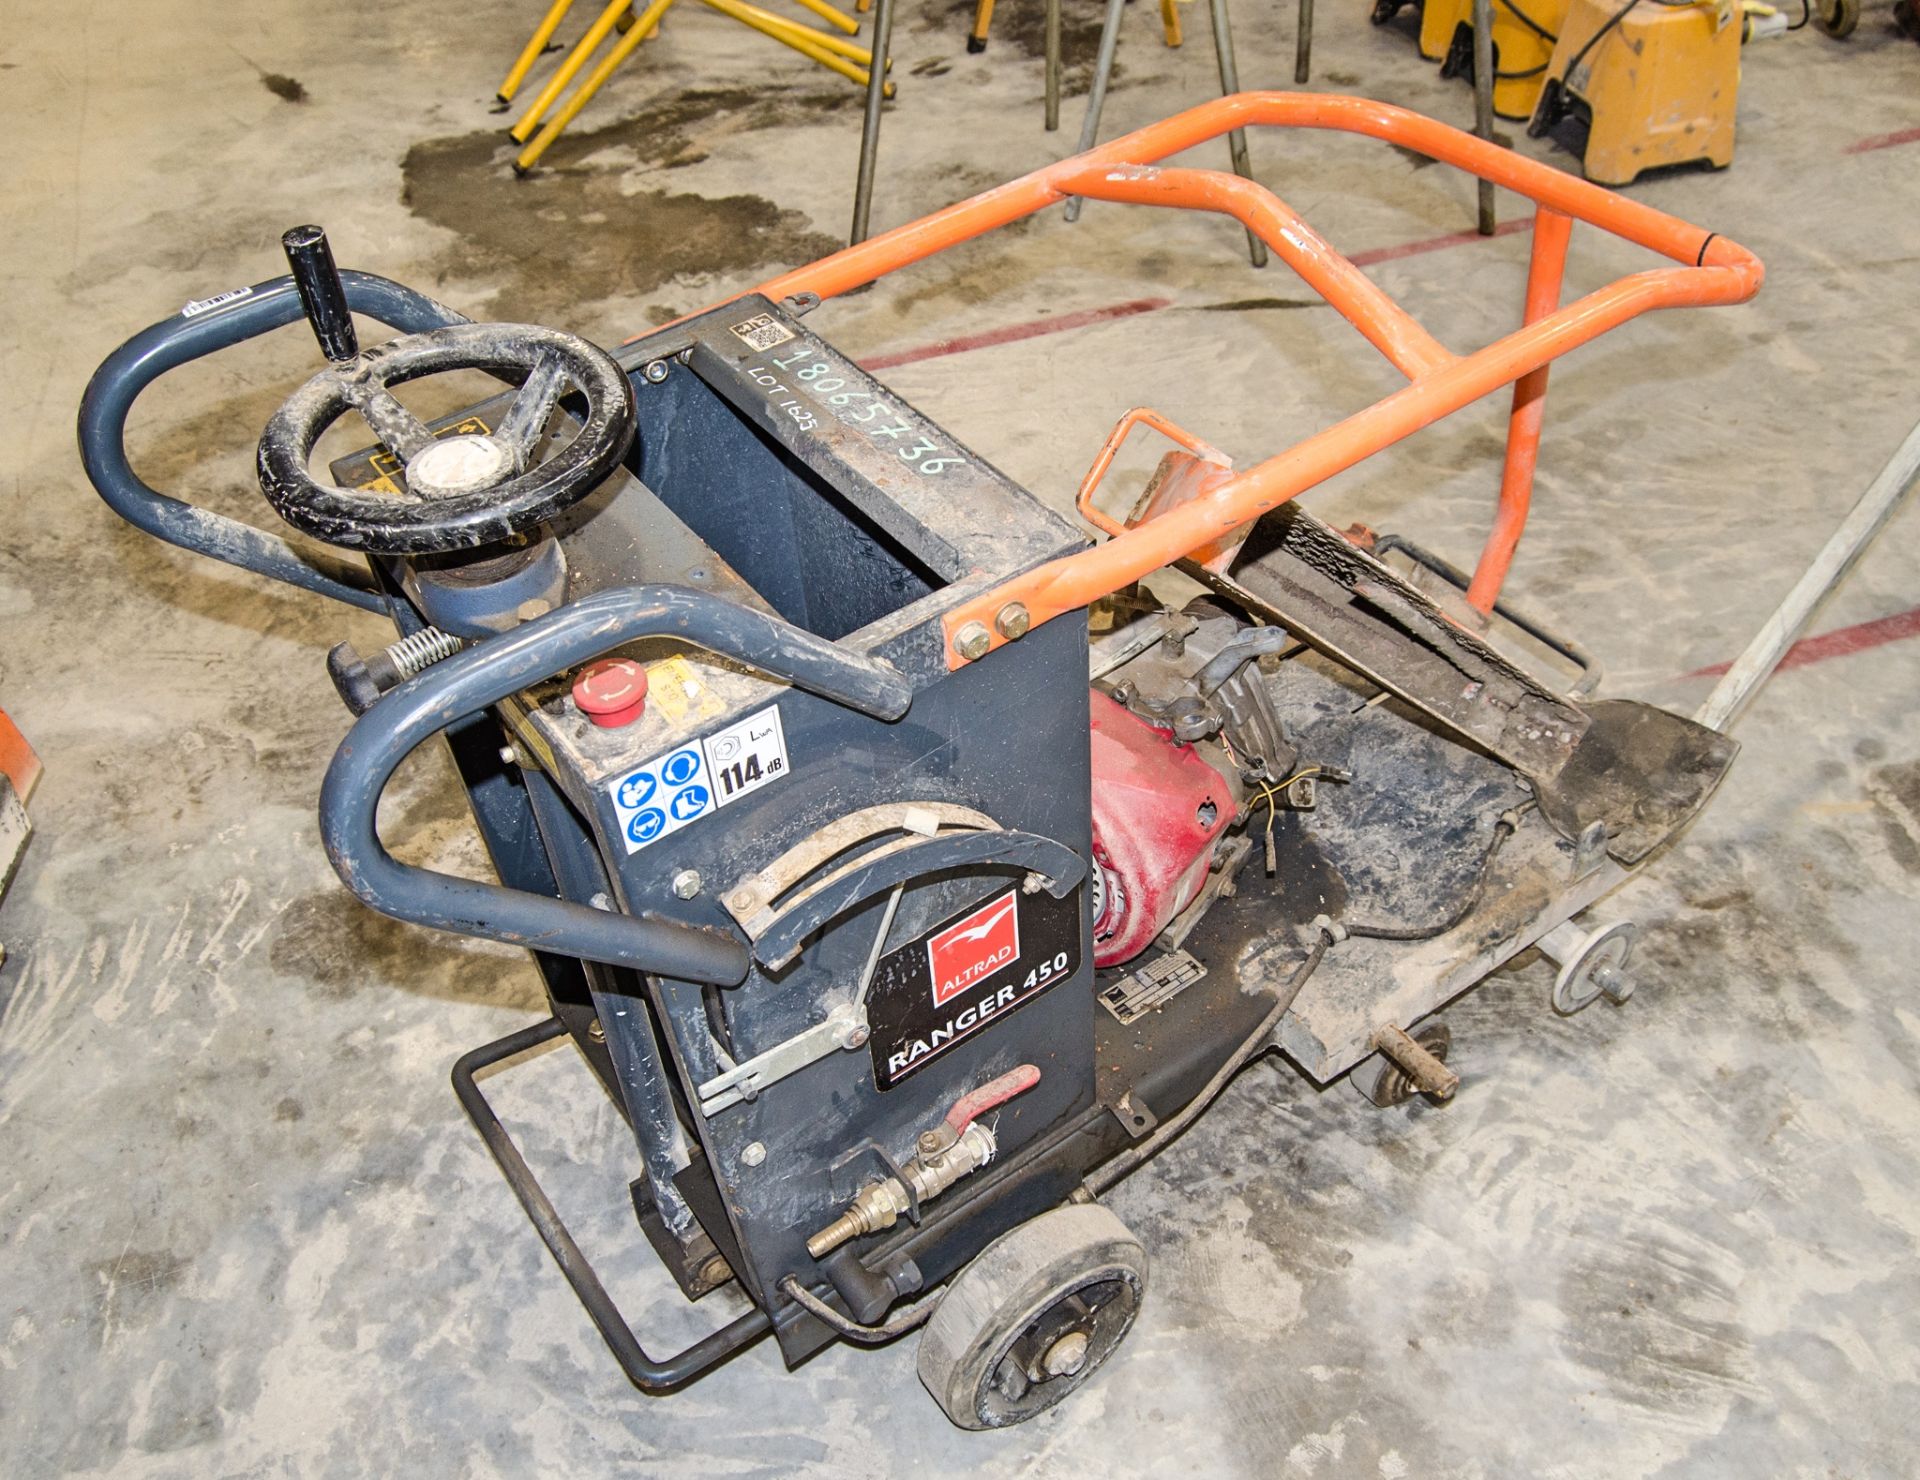 Altrad Belle Ranger 450 petrol driven road saw for spares 18065736 - Image 2 of 3